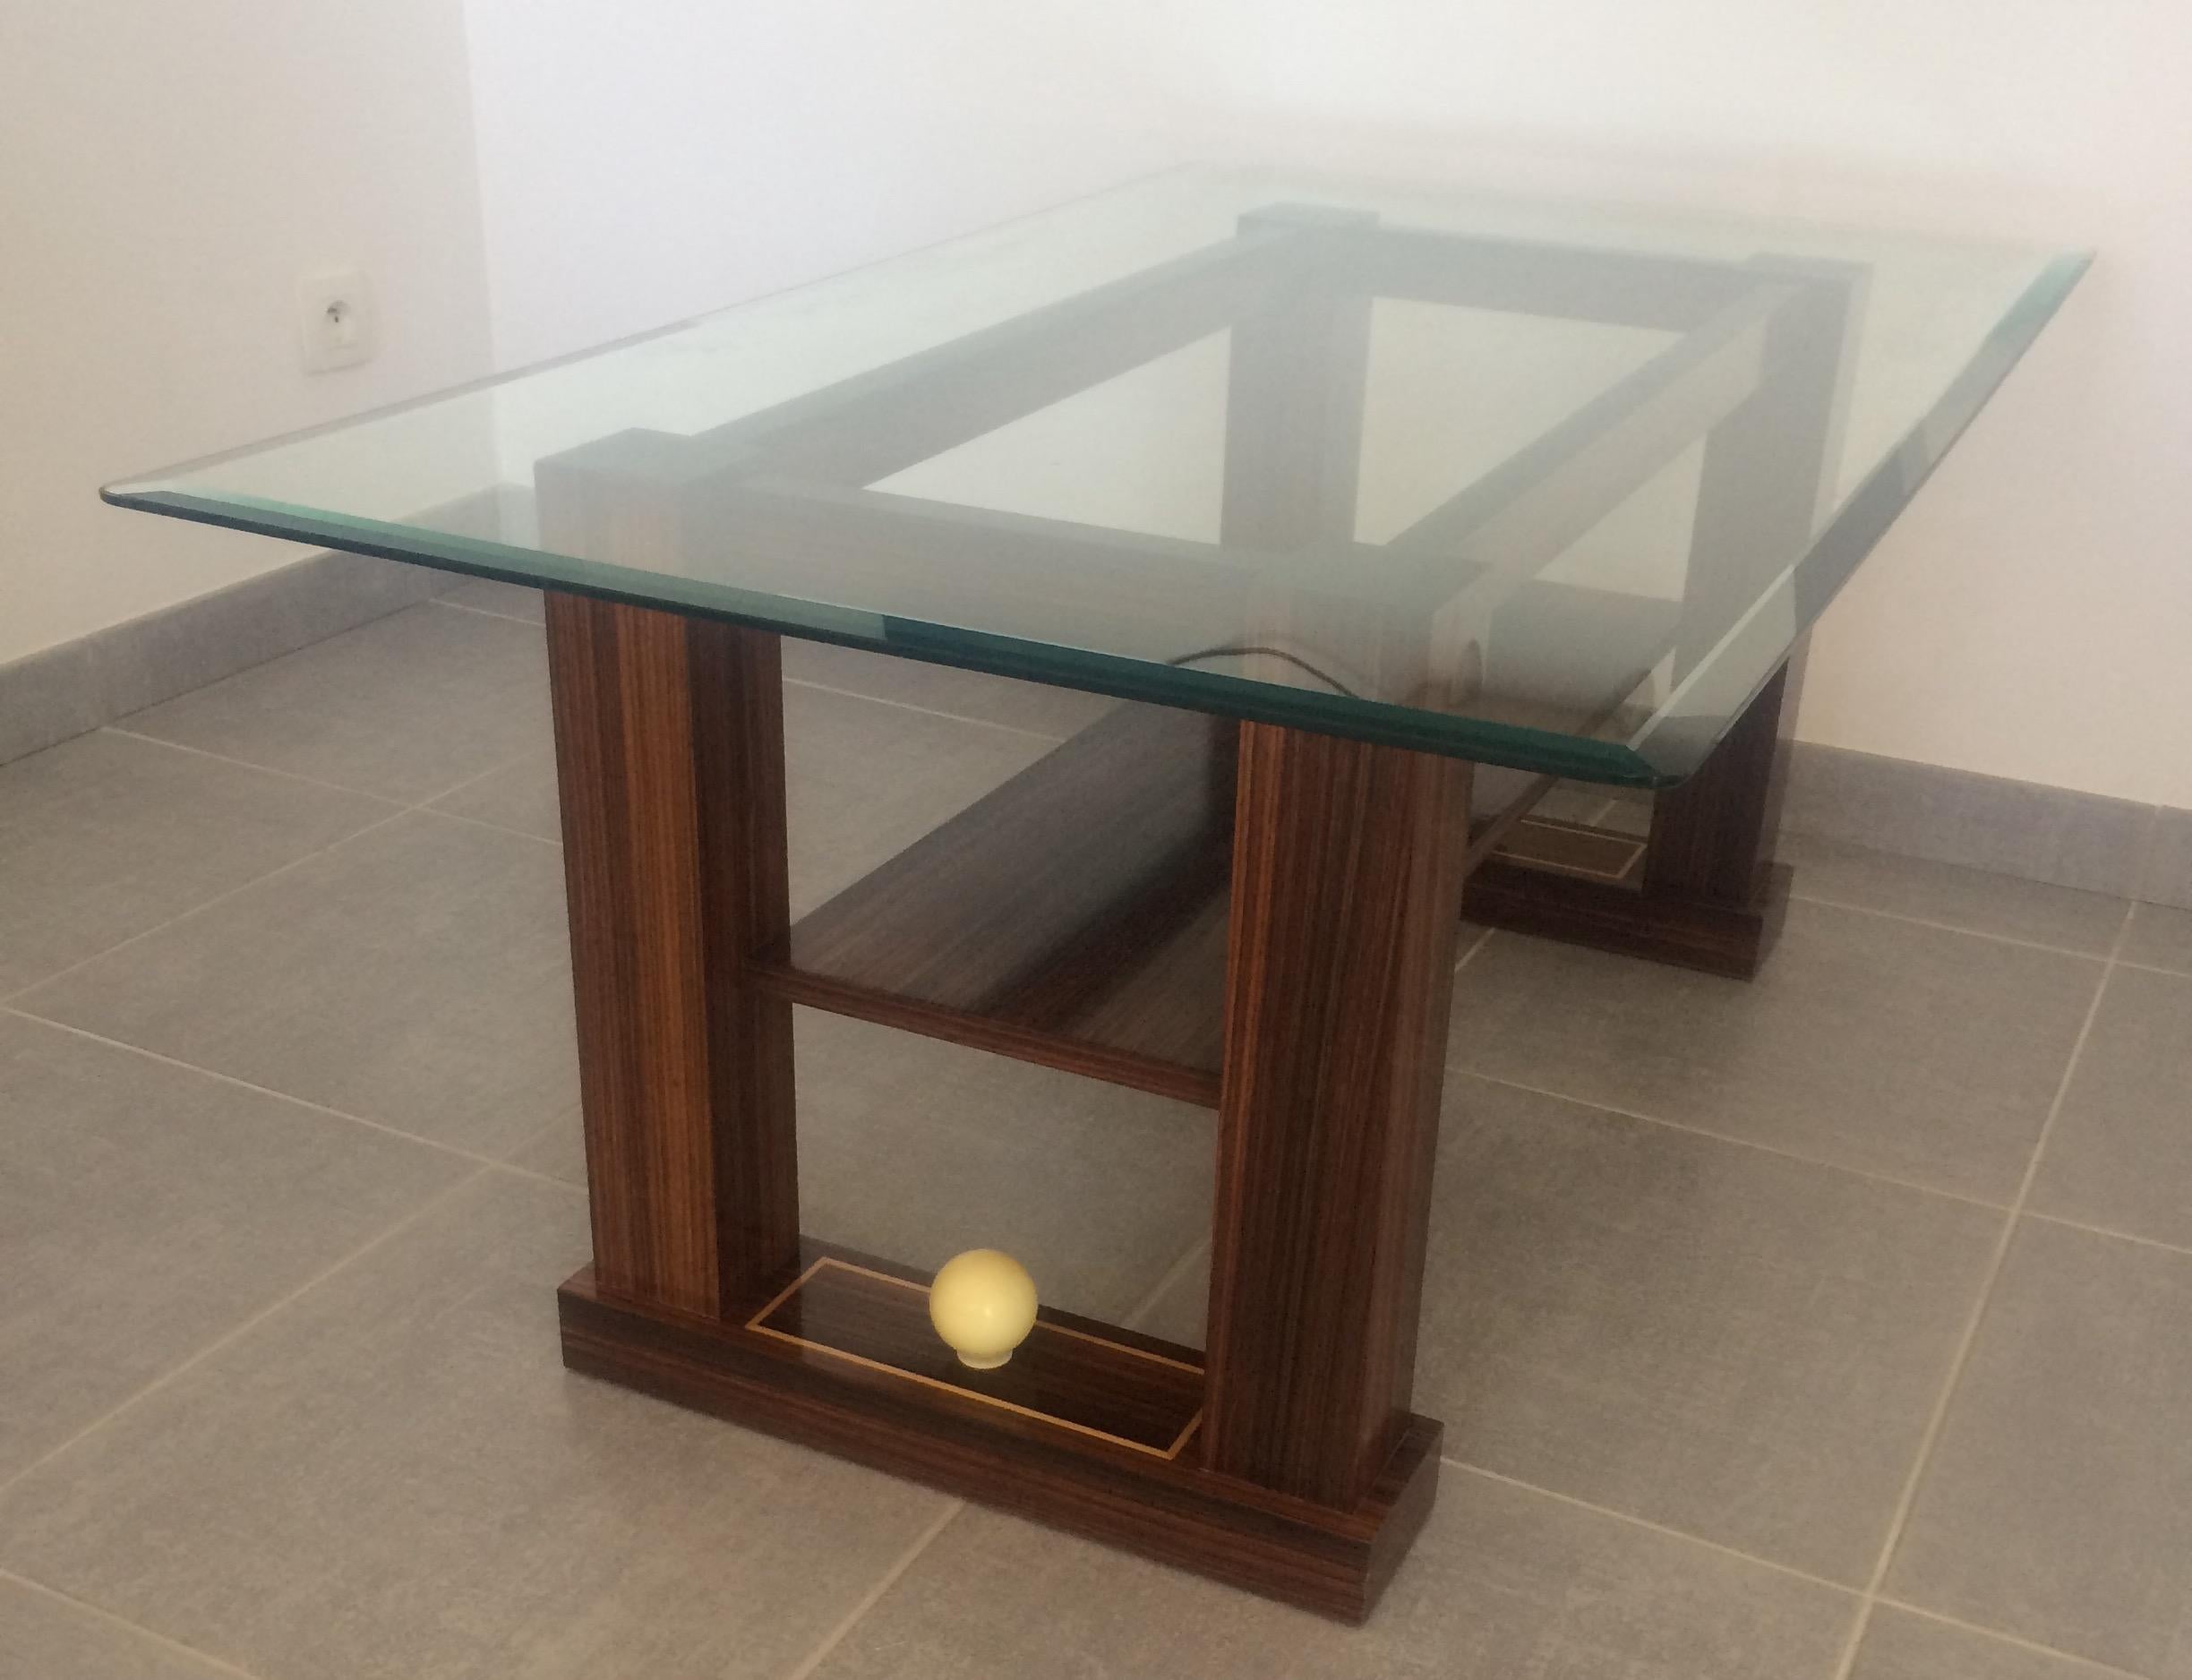 Sleek designed French Art Deco style coffee table with a beveled glass top. 

The table is made of rosewood veneer set on perfectly sturdy legs. Features a centered wooden shelf below the glass top. A base features stretchers accentuated with an